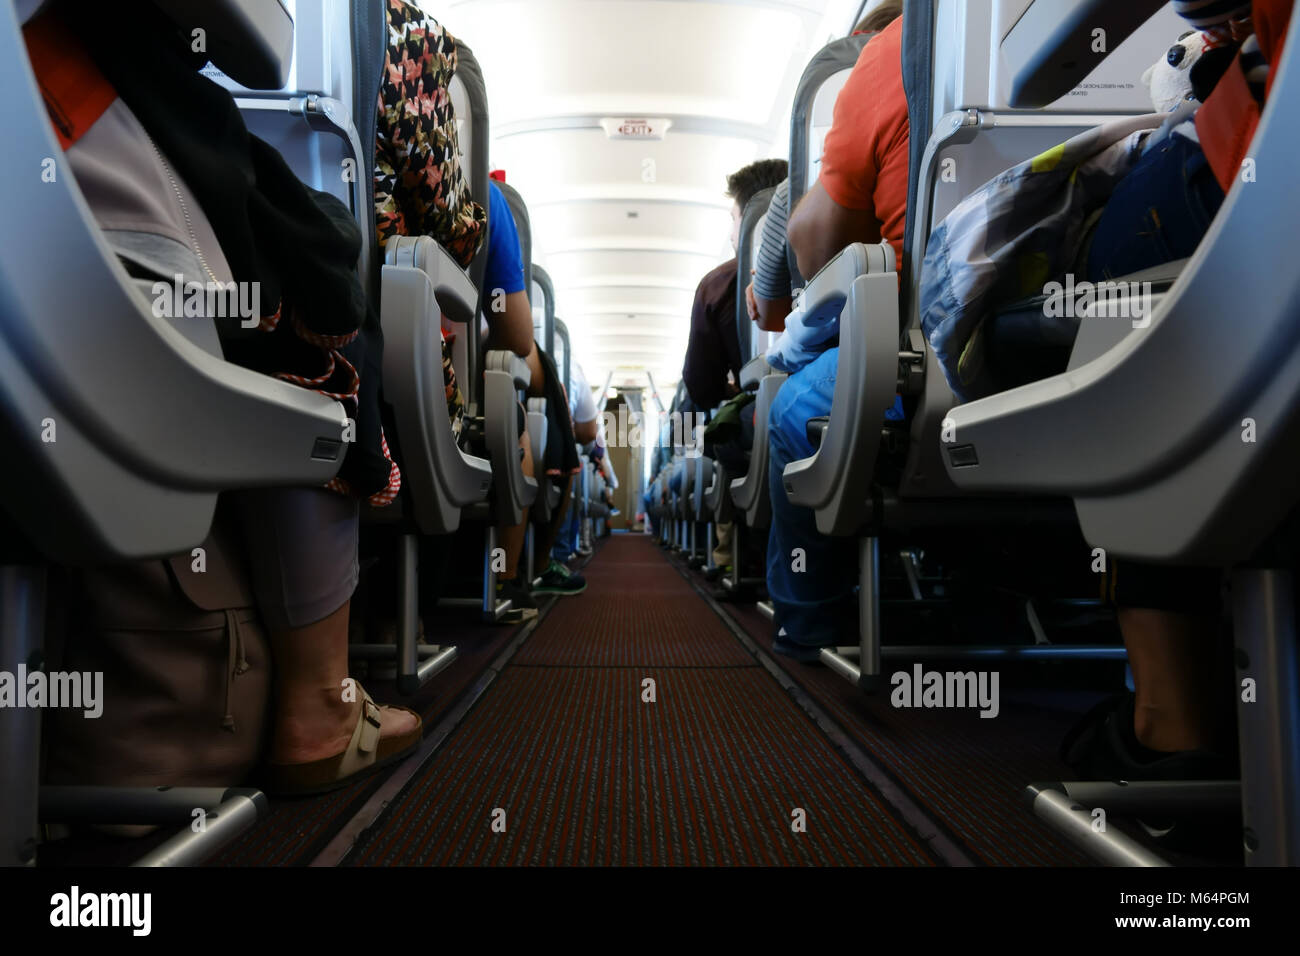 Passenger cabin in flight with people. Economy class. View from floor. Stock Photo